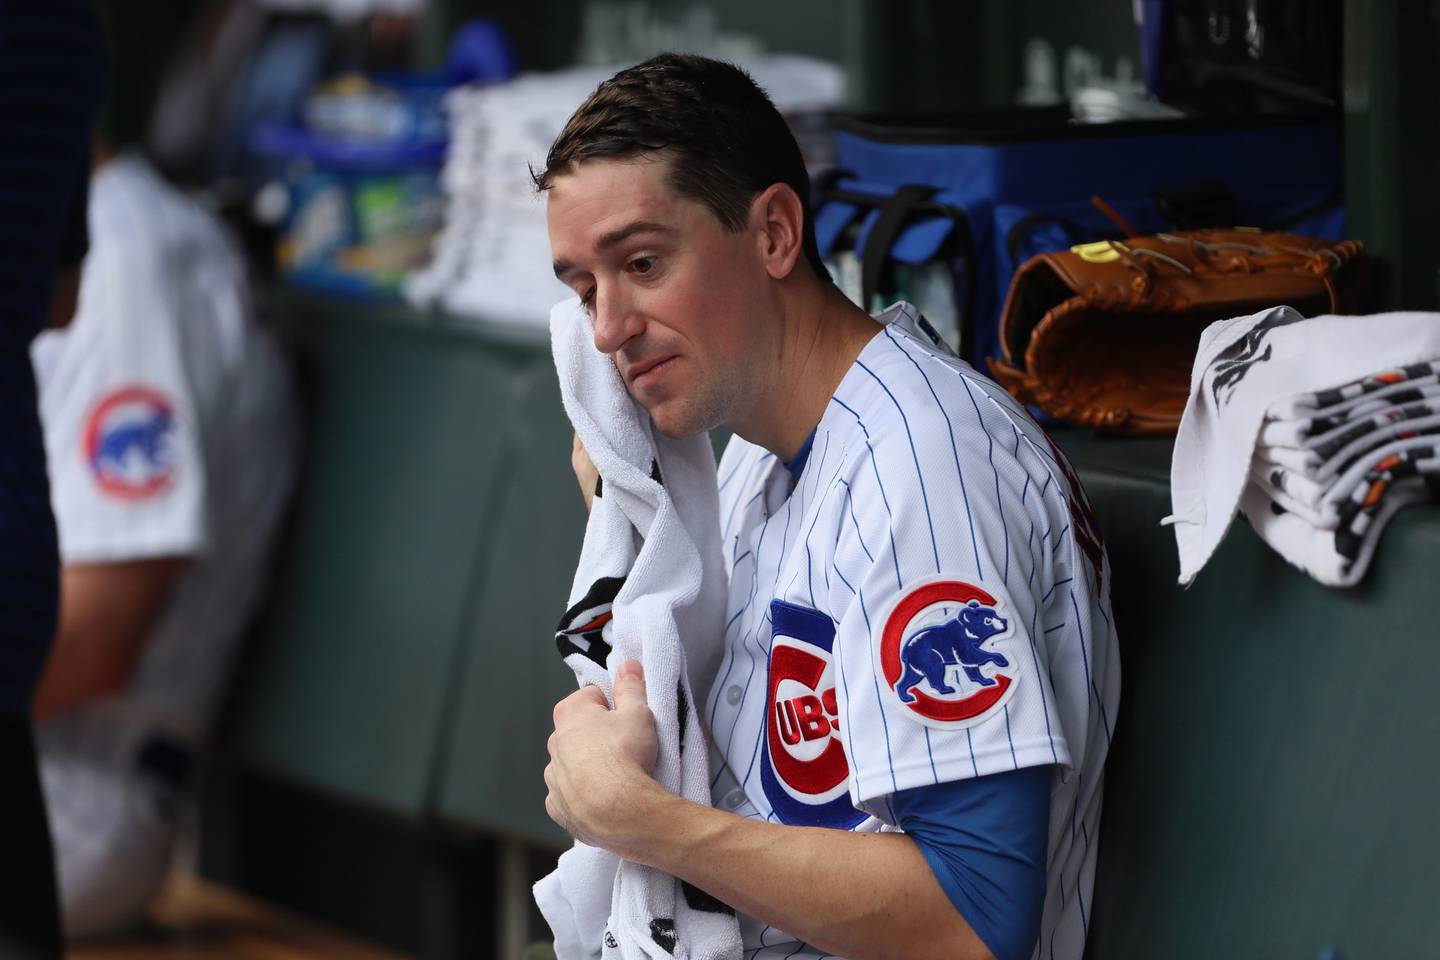 Cubs starting pitcher Kyle Hendricks wipes the sweat from his face during a game against the Cardinals on May 20 at Wrigley Field. 